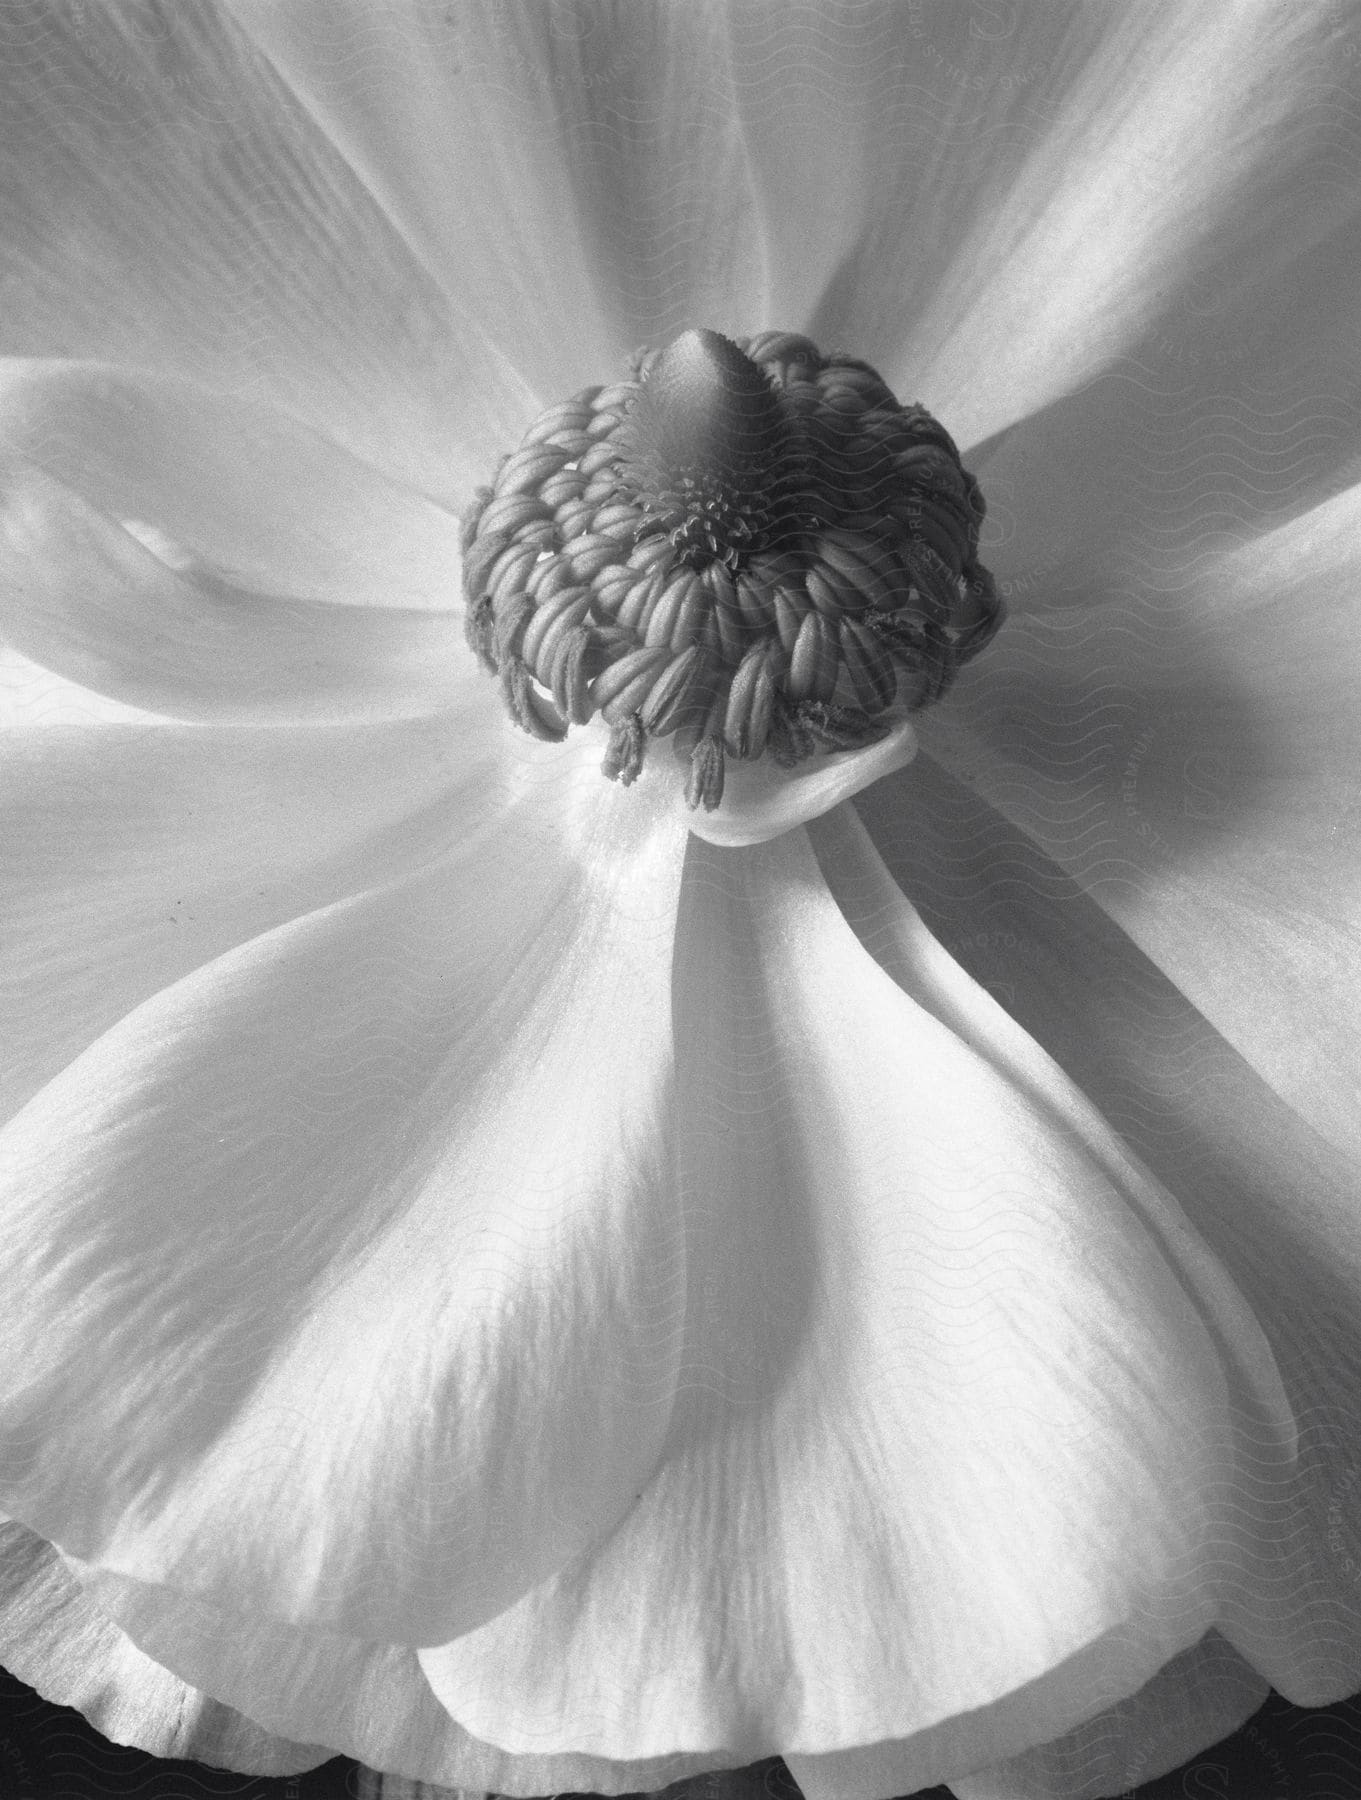 A highly magnified large white flower showing detailed petals and center